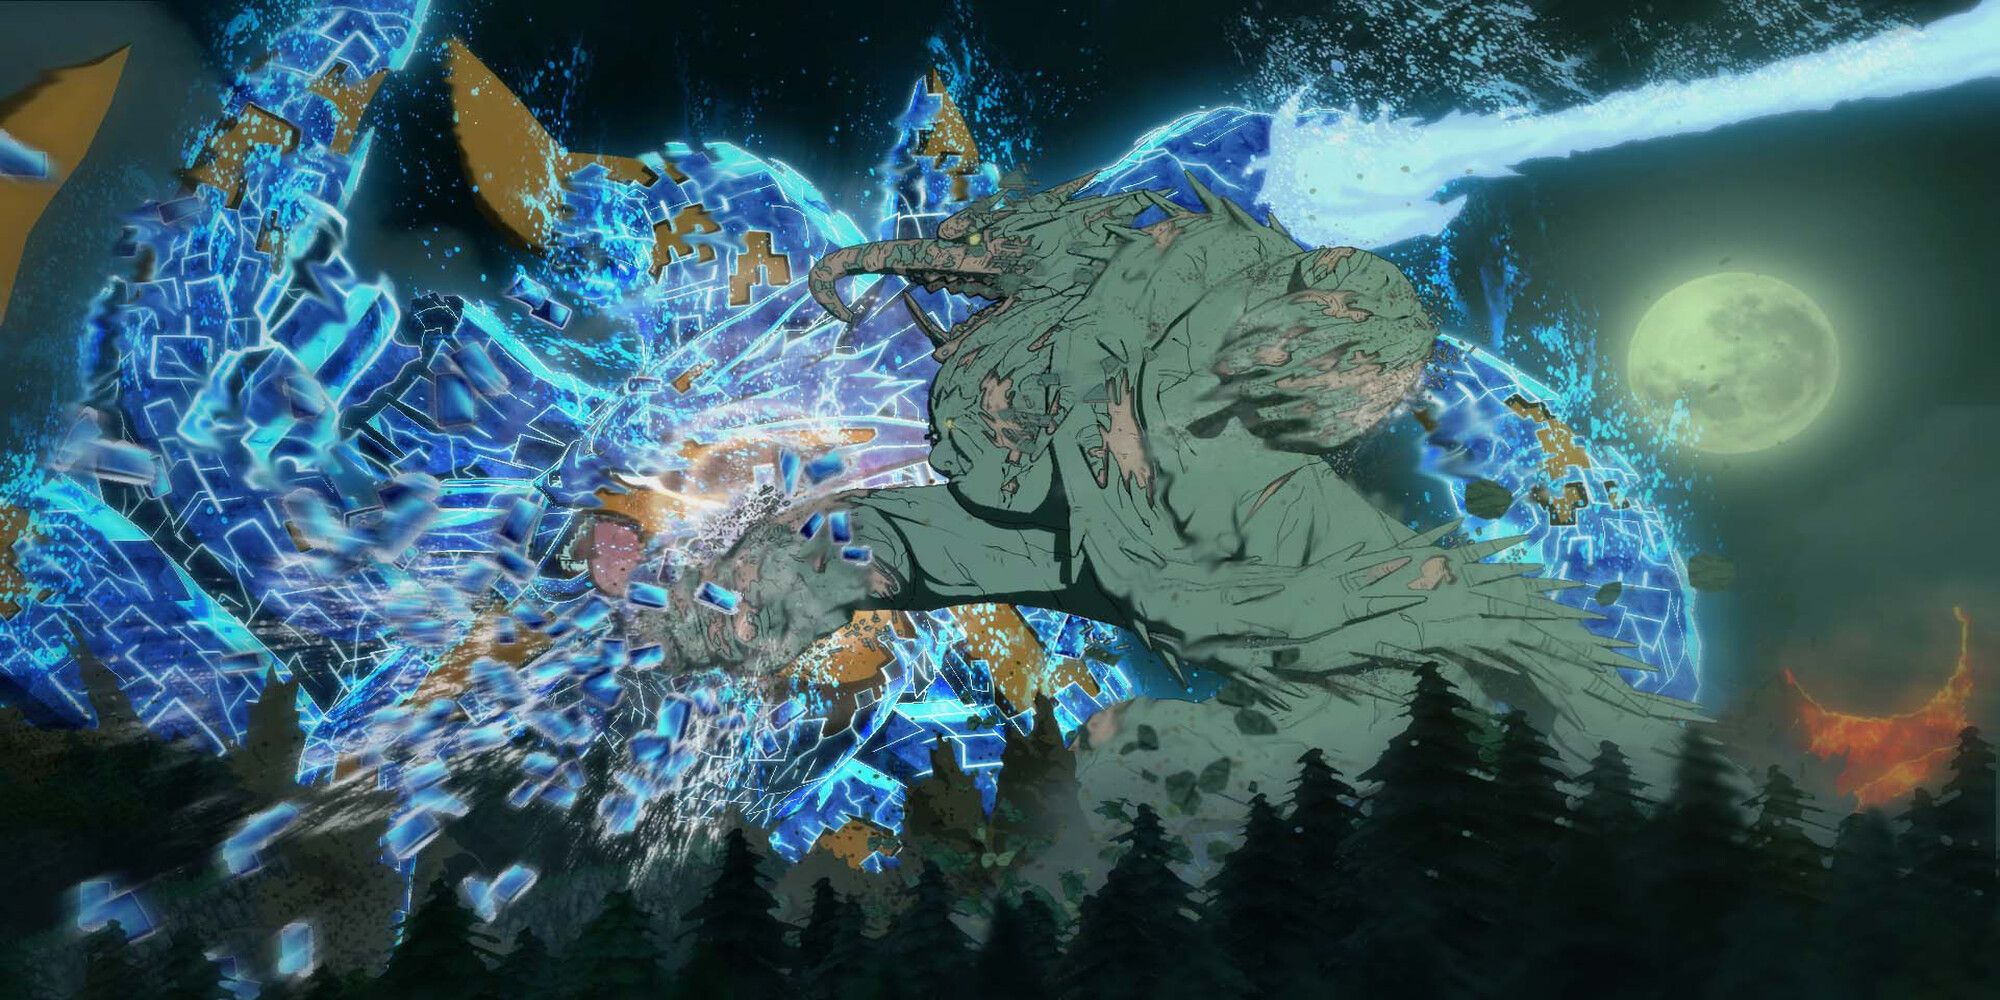 Two giant beasts fighting each other.